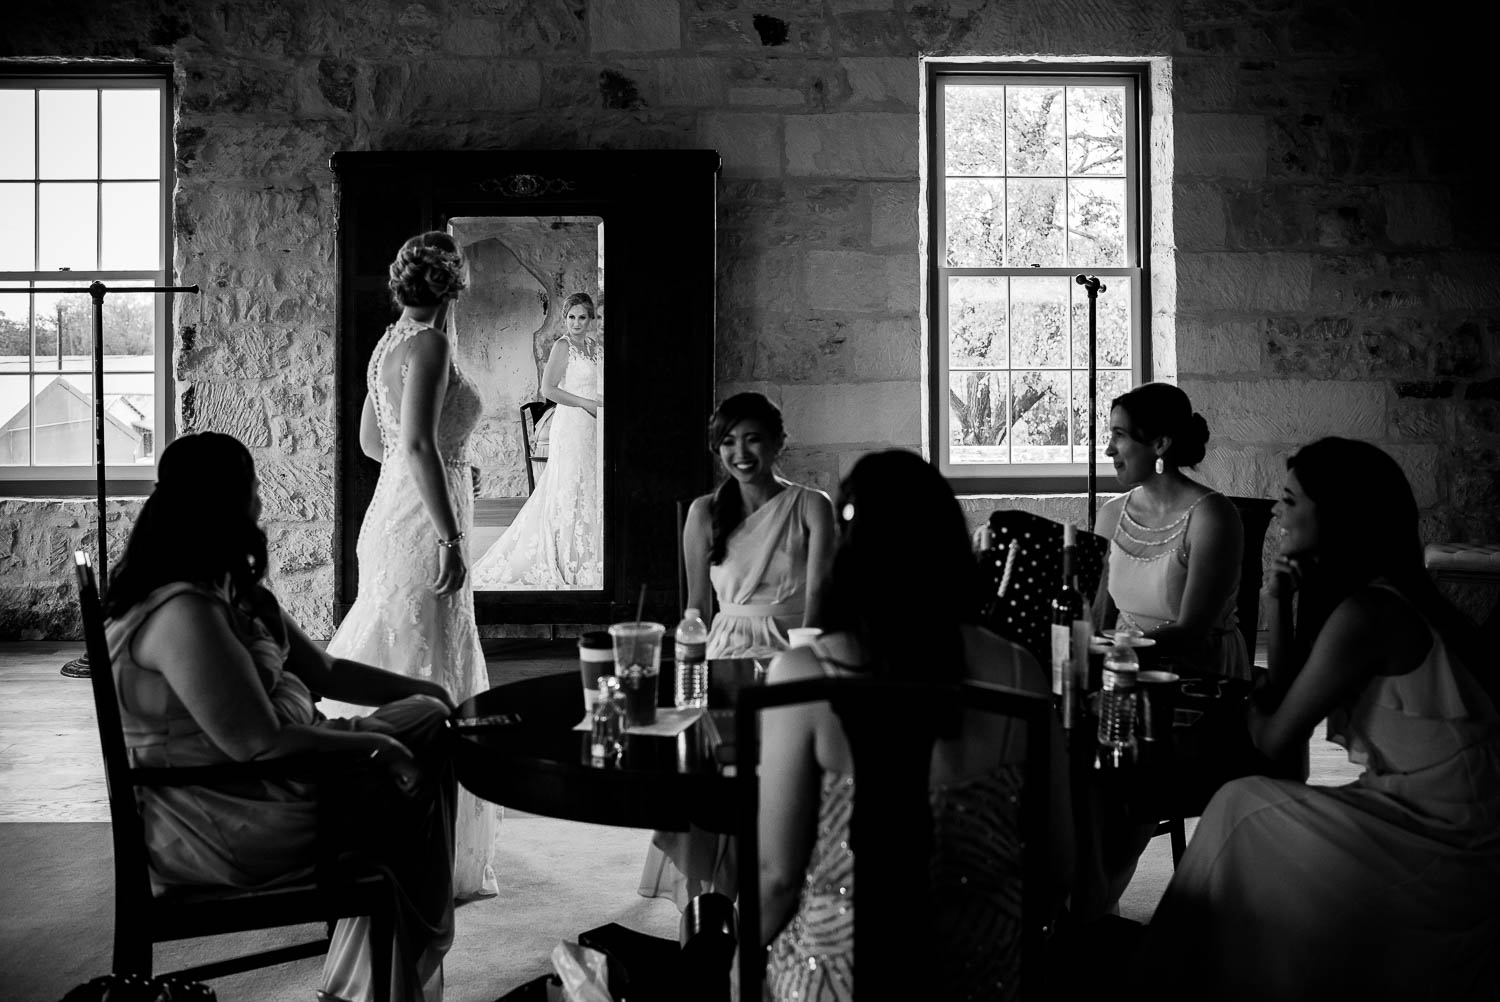 Bride checks herself in the mirror as friends sit a table at ingenhuett-on-high-wedding_leslie_omar-leica-wedding-photographer-philip-thomas - Best of wedding 2017 The Knot